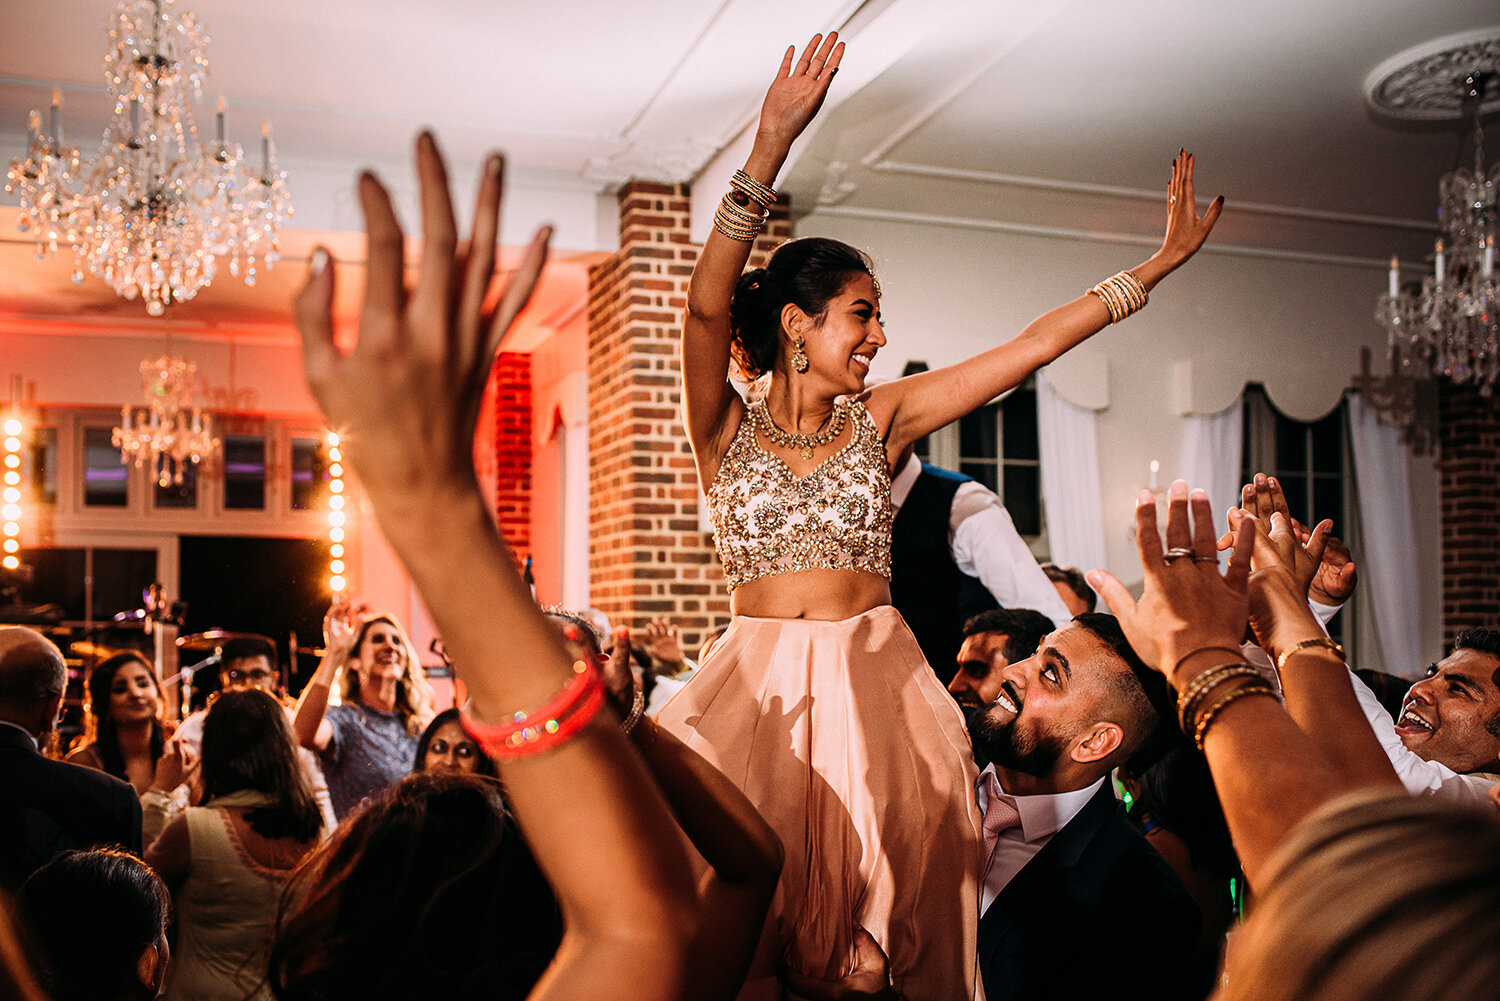  bride lifted up on the dance floor  